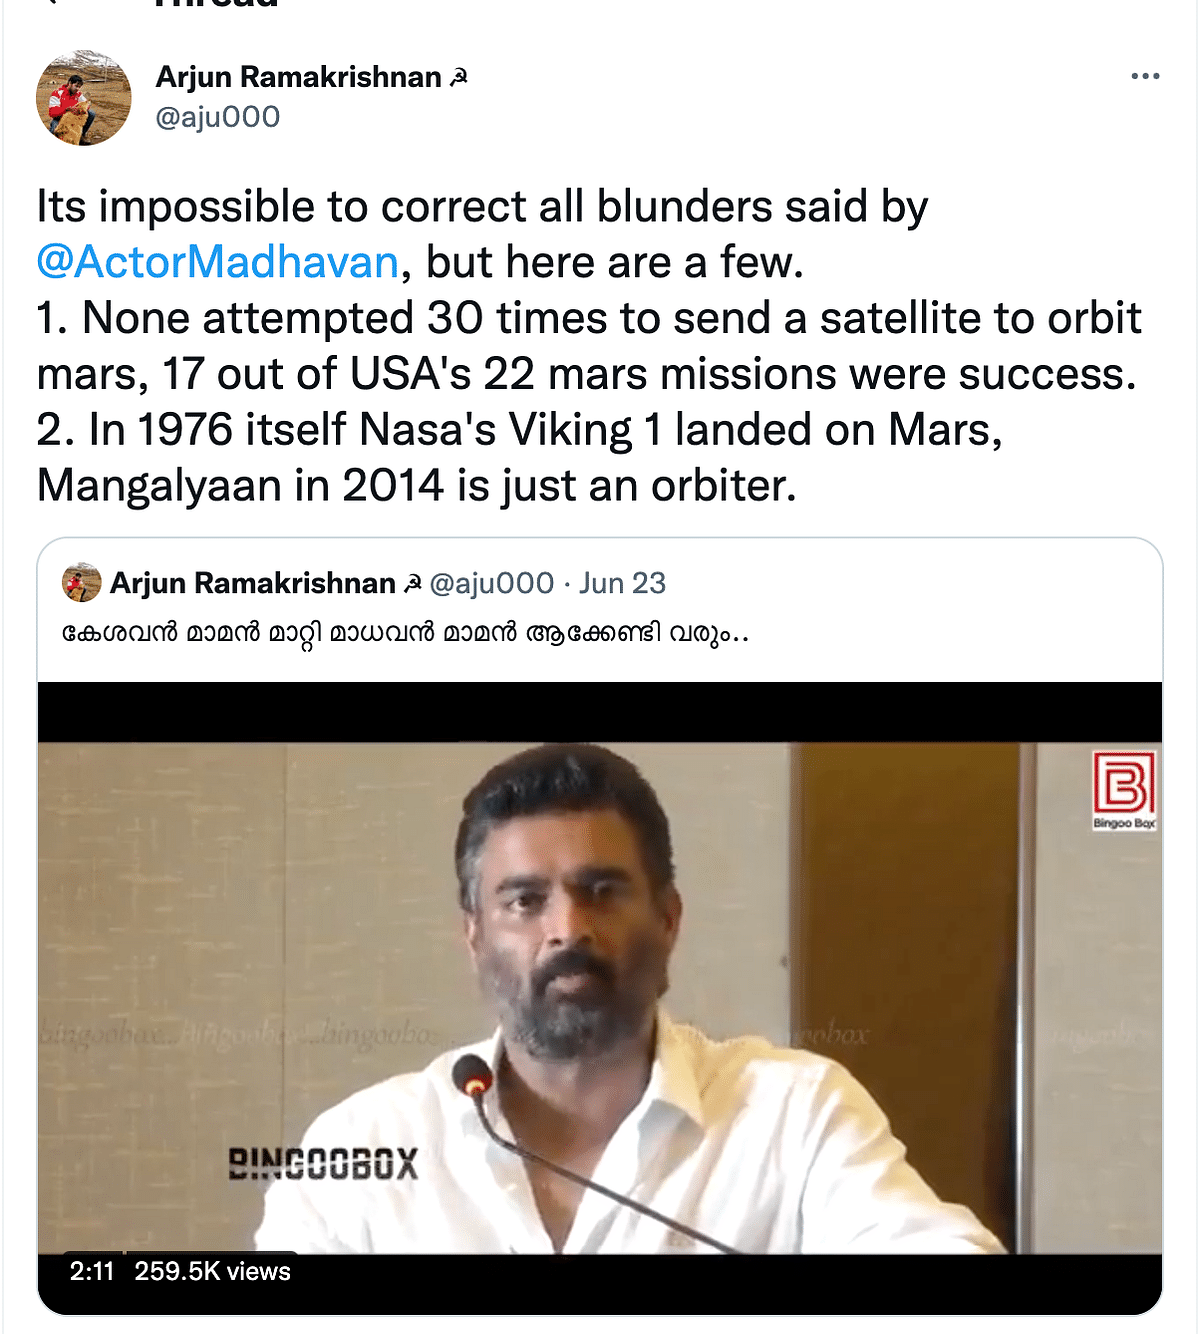 Madhavan made these remarks while promoting his movie, Rocketry: The Nambi Effect.